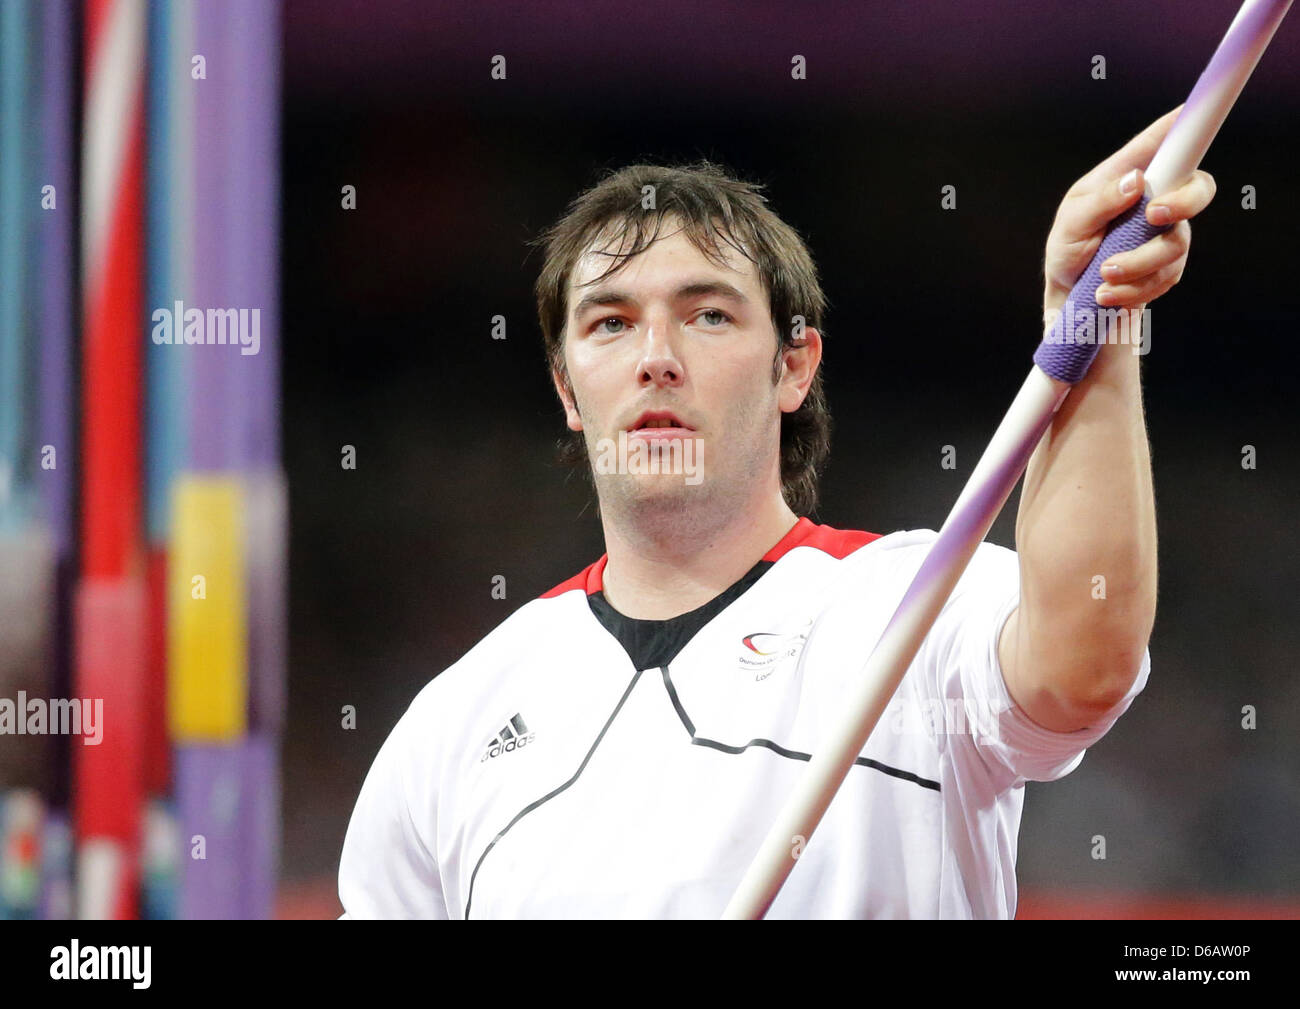 Matthias de Zordo of Germany reacts during the Men's Javelin Throw Qualifikation of the Athletics, Track and Field events in Olympic Stadium at the London 2012 Olympic Games, London, Great Britain, 08 August 2012. Photo: Michael Kappeler dpa  +++(c) dpa - Bildfunk+++ Stock Photo